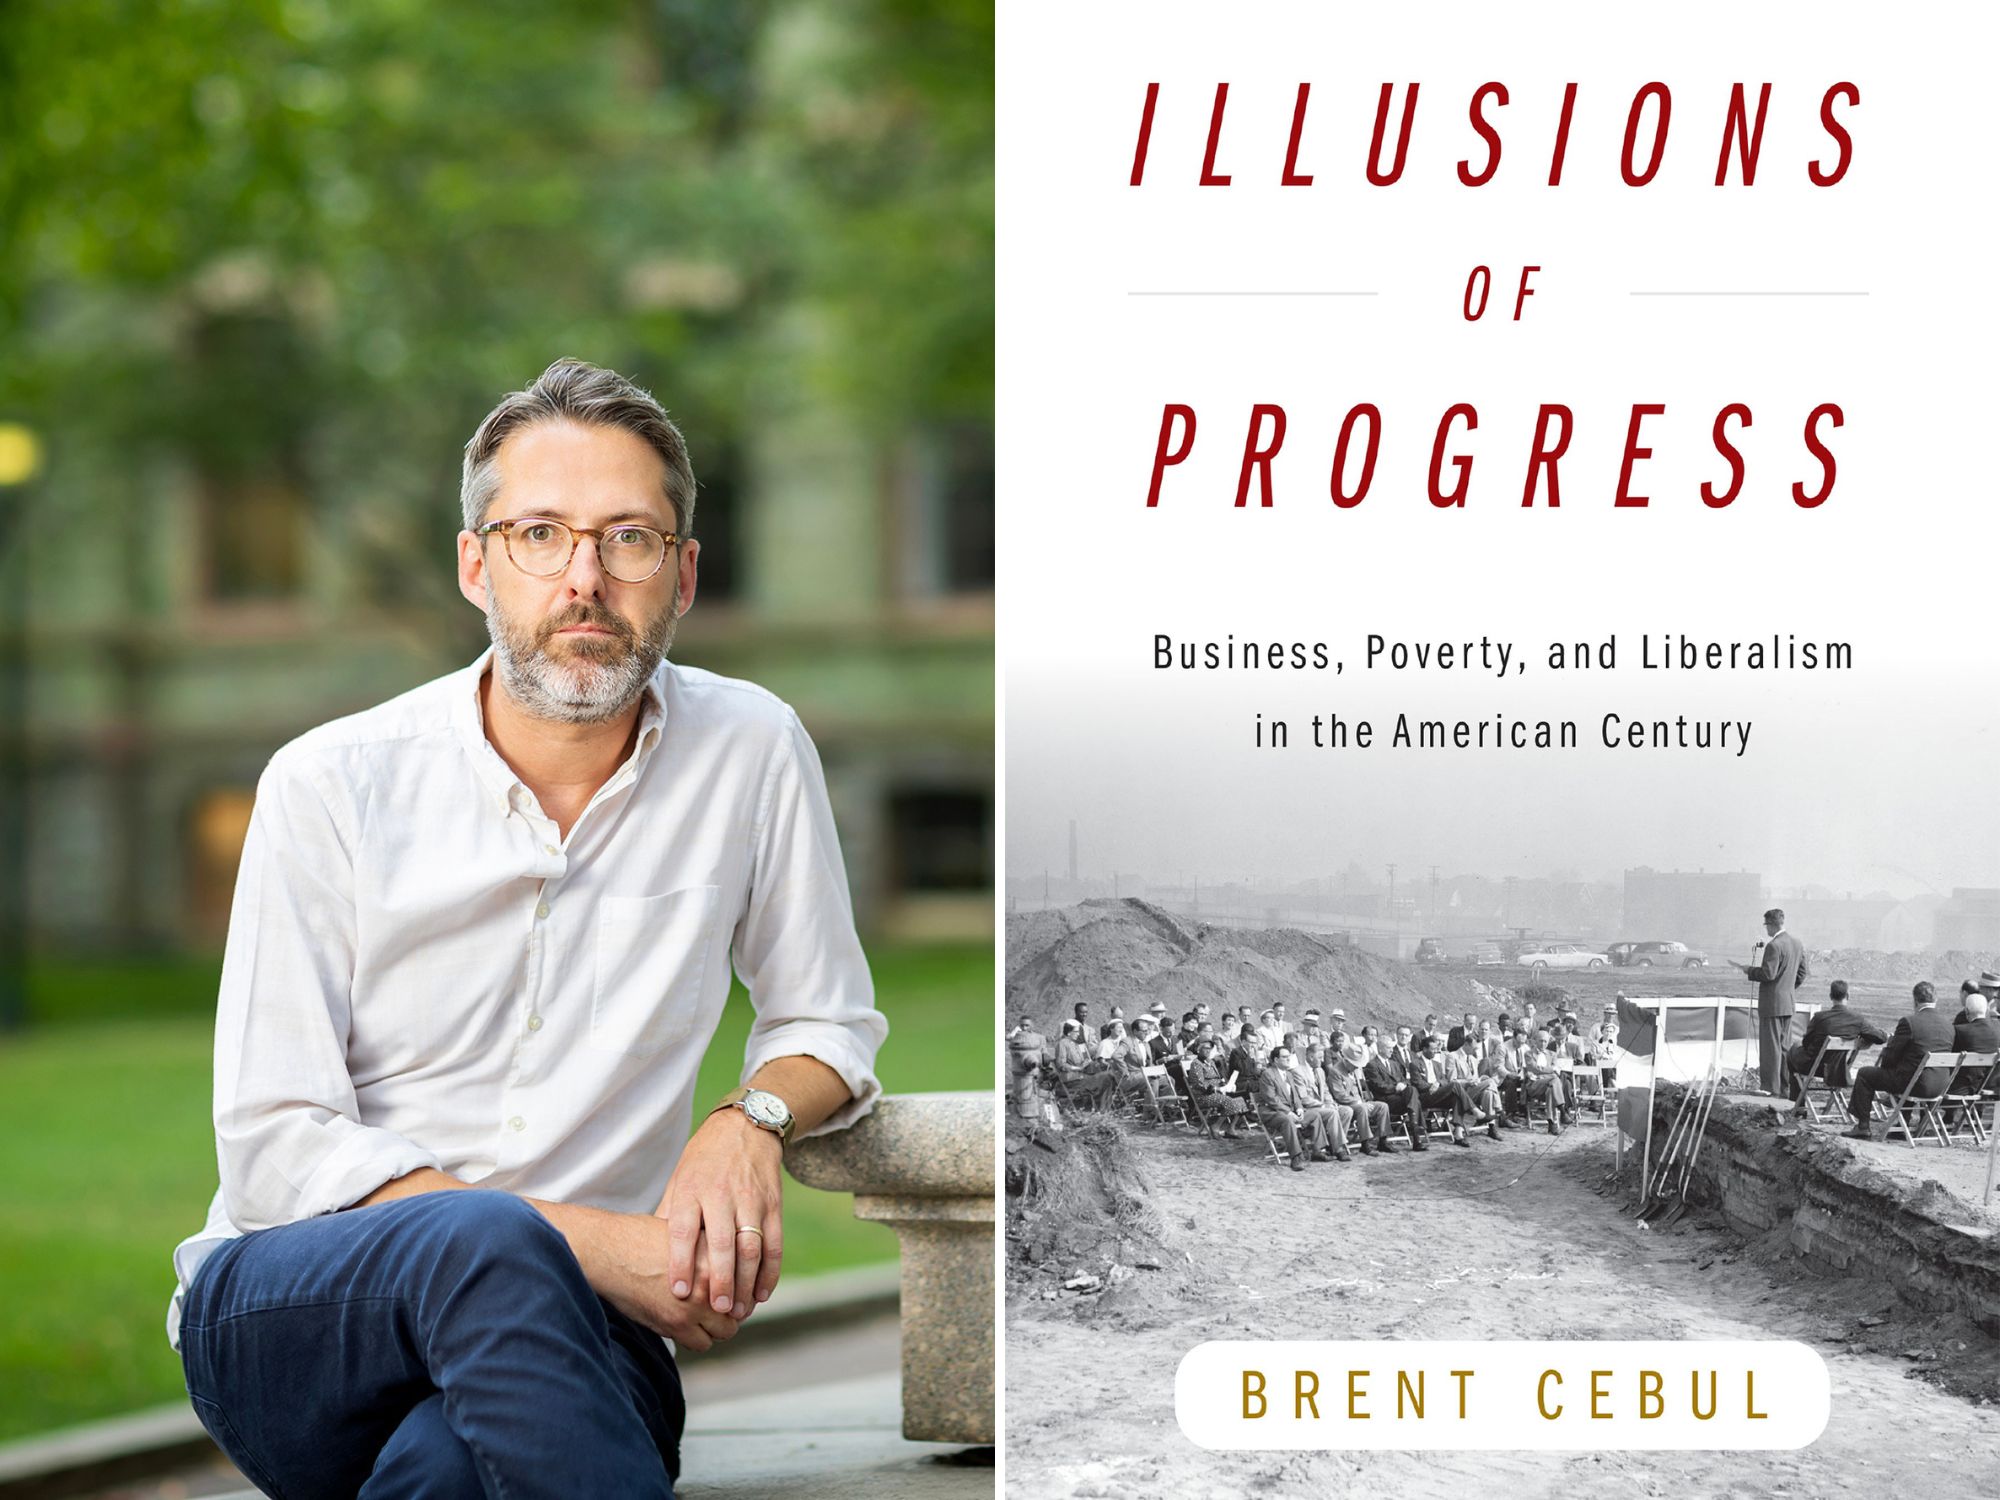 Brent Cebul and the book jacket for Illusions of Progress by Brent Cebul.